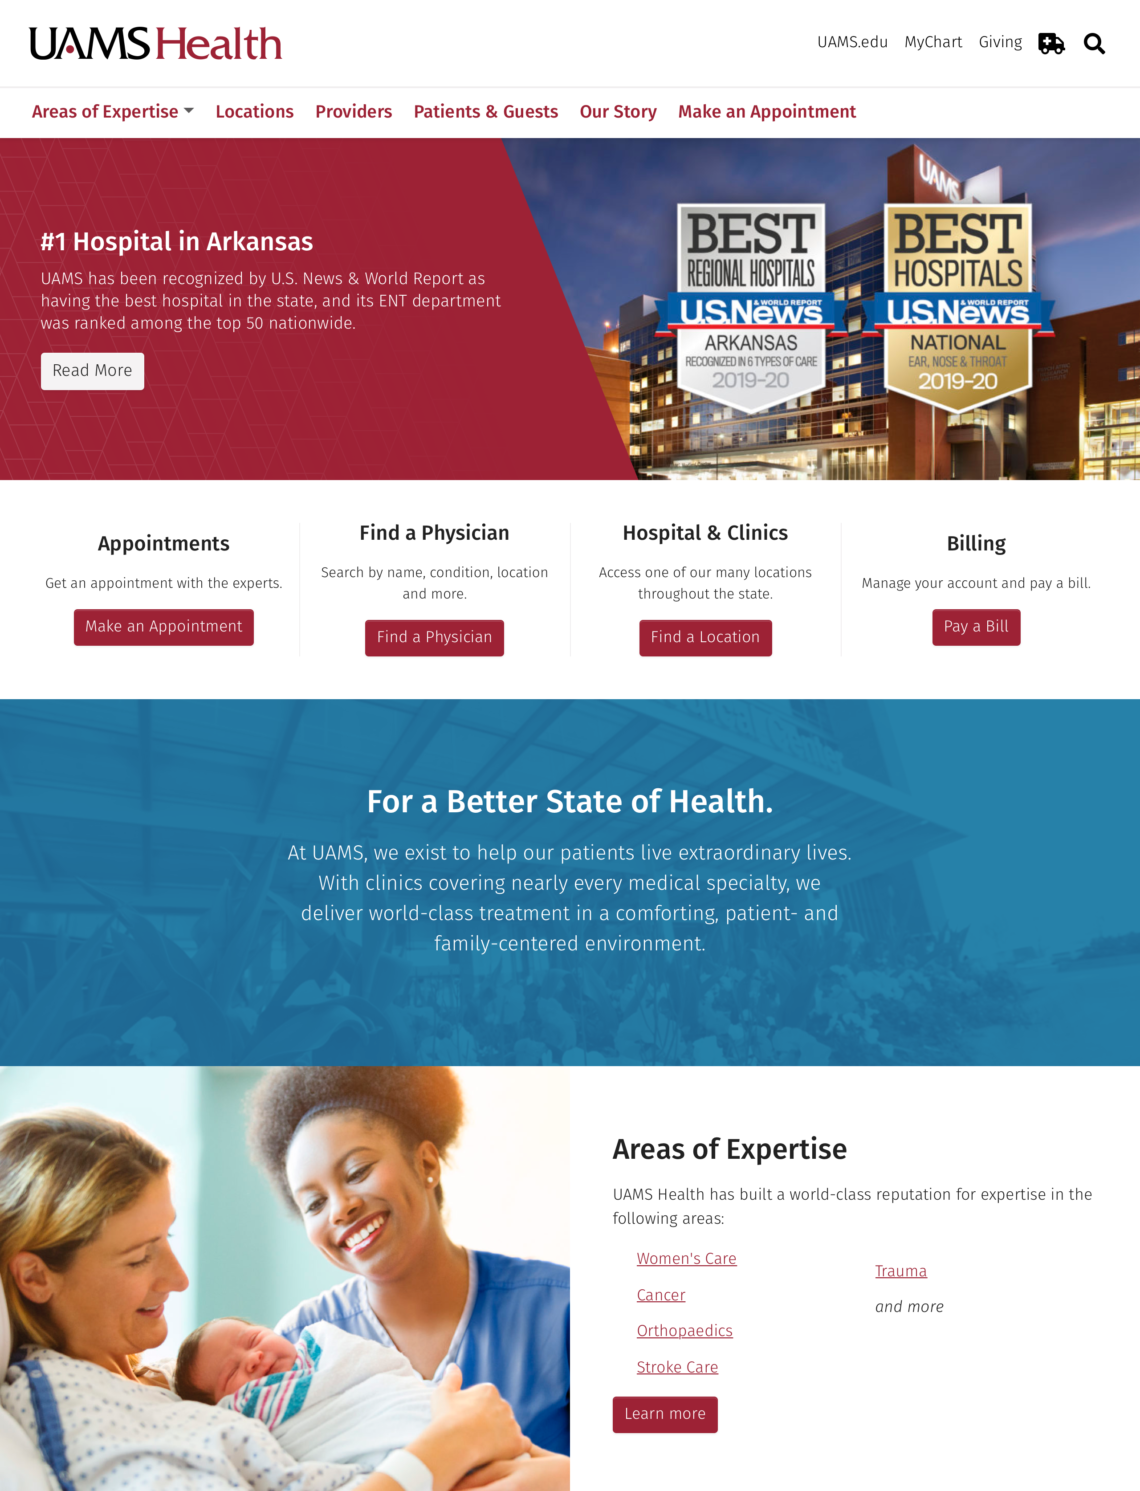 UAMS Launches Redesigned Website, New Advertising Campaign UAMS News